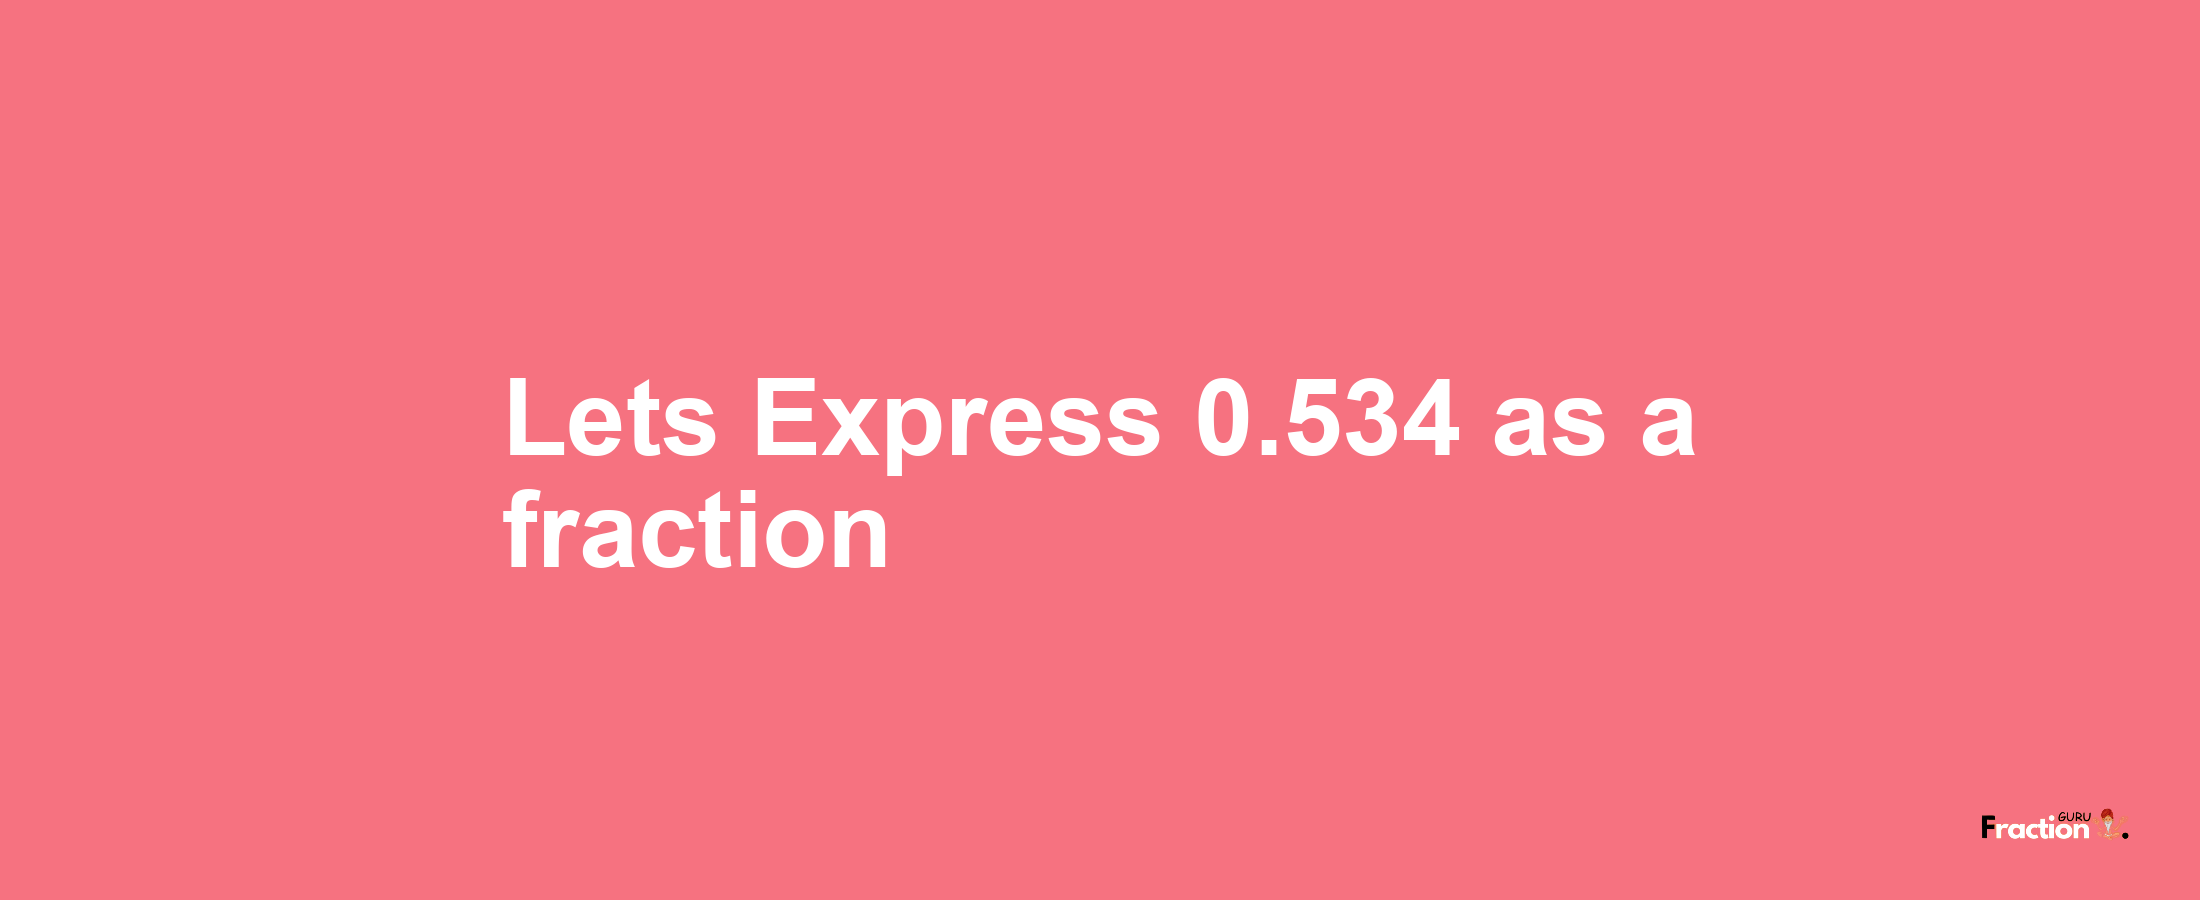 Lets Express 0.534 as afraction